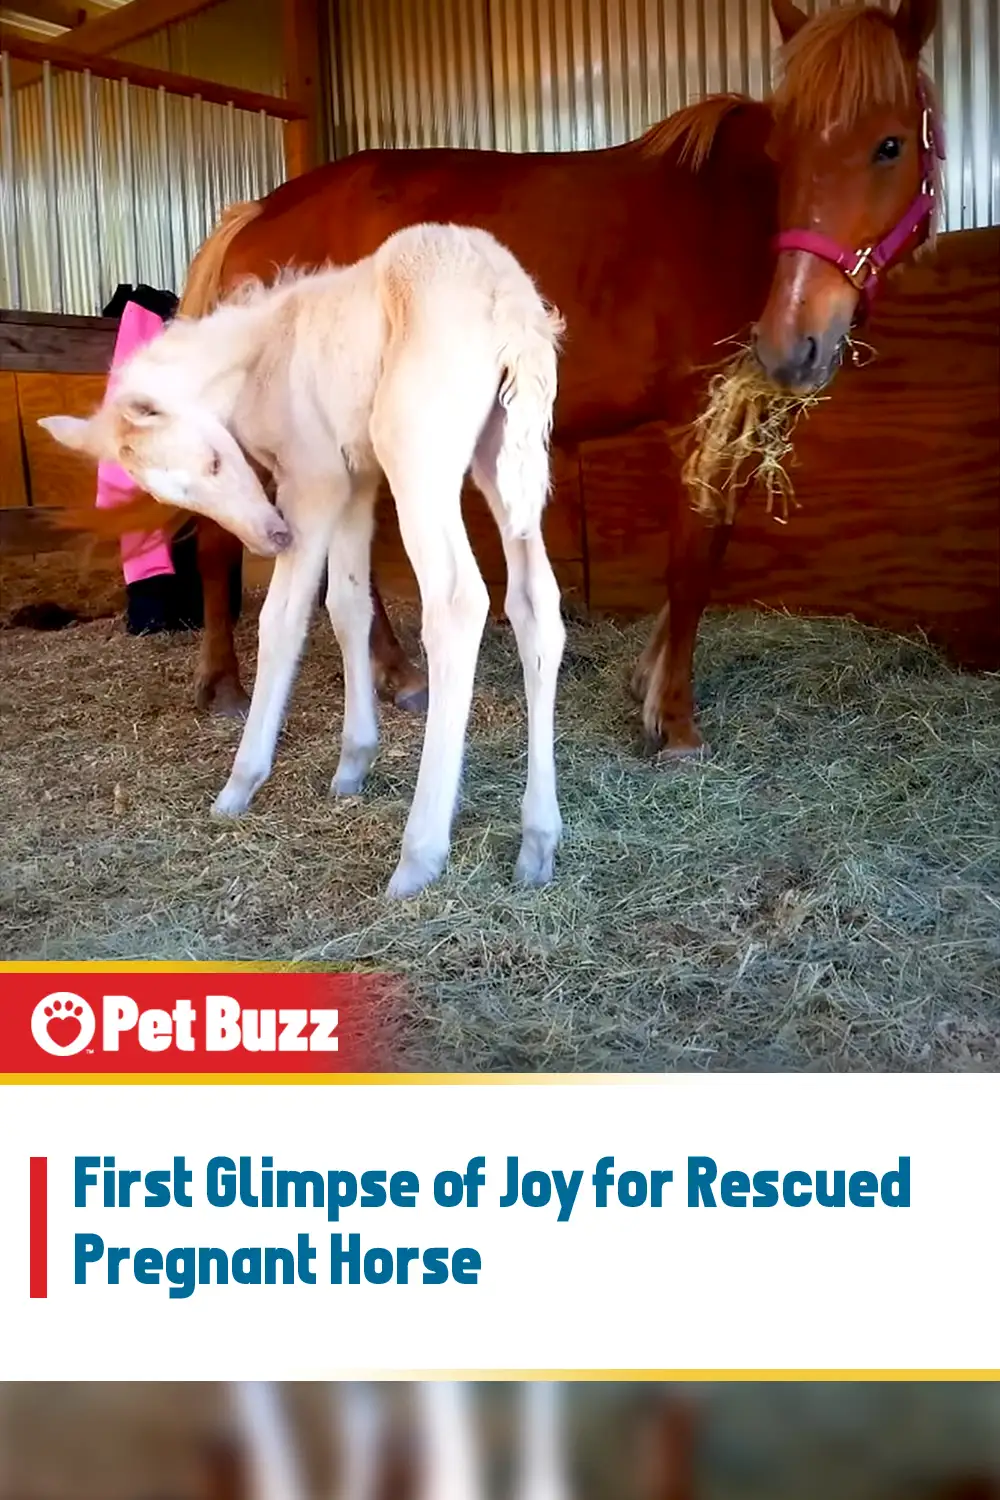 First Glimpse of Joy for Rescued Pregnant Horse